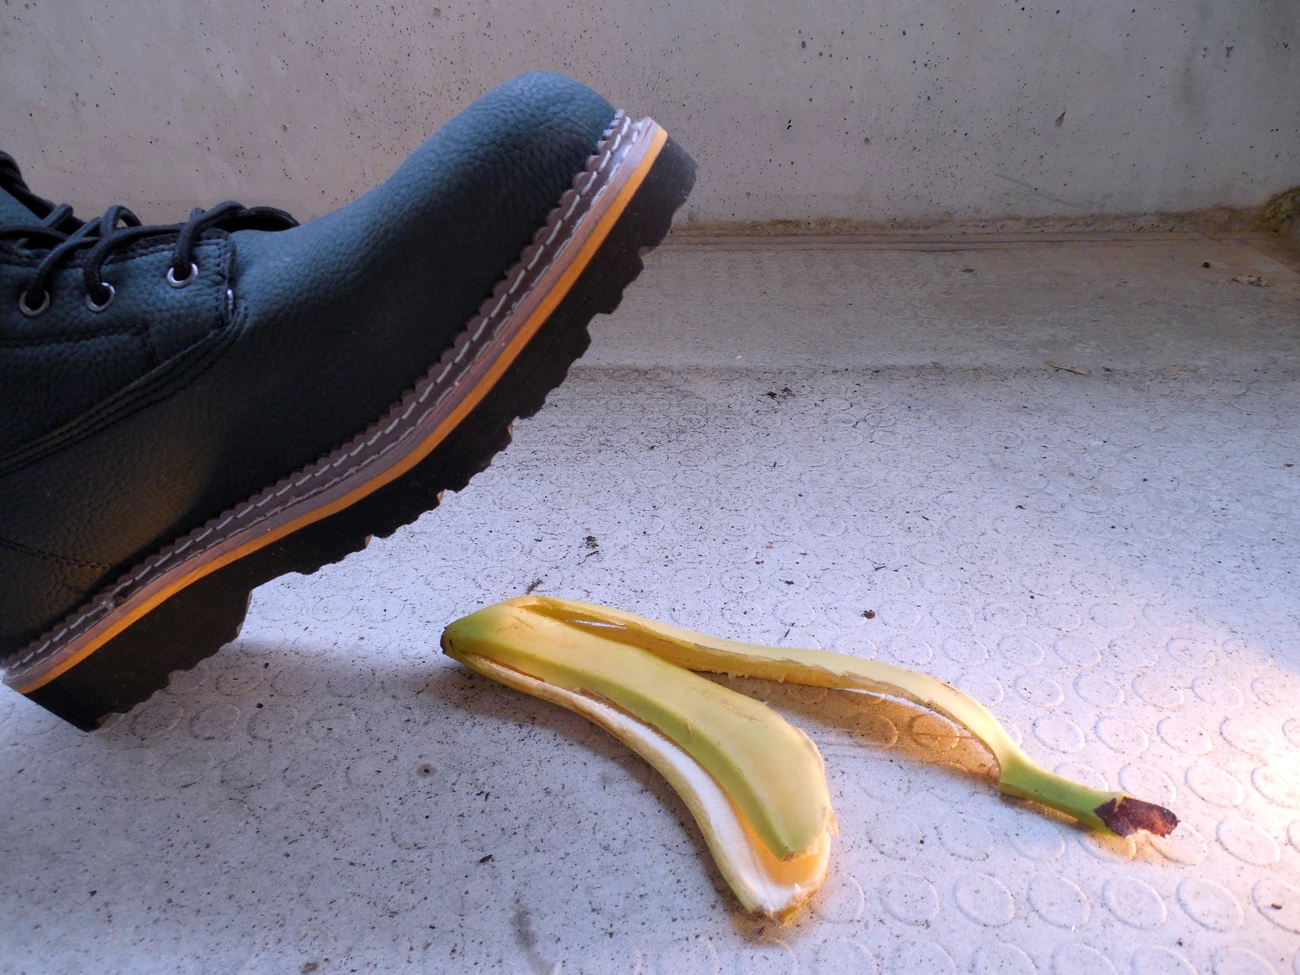 A boot about to step on a banana skin on the floor